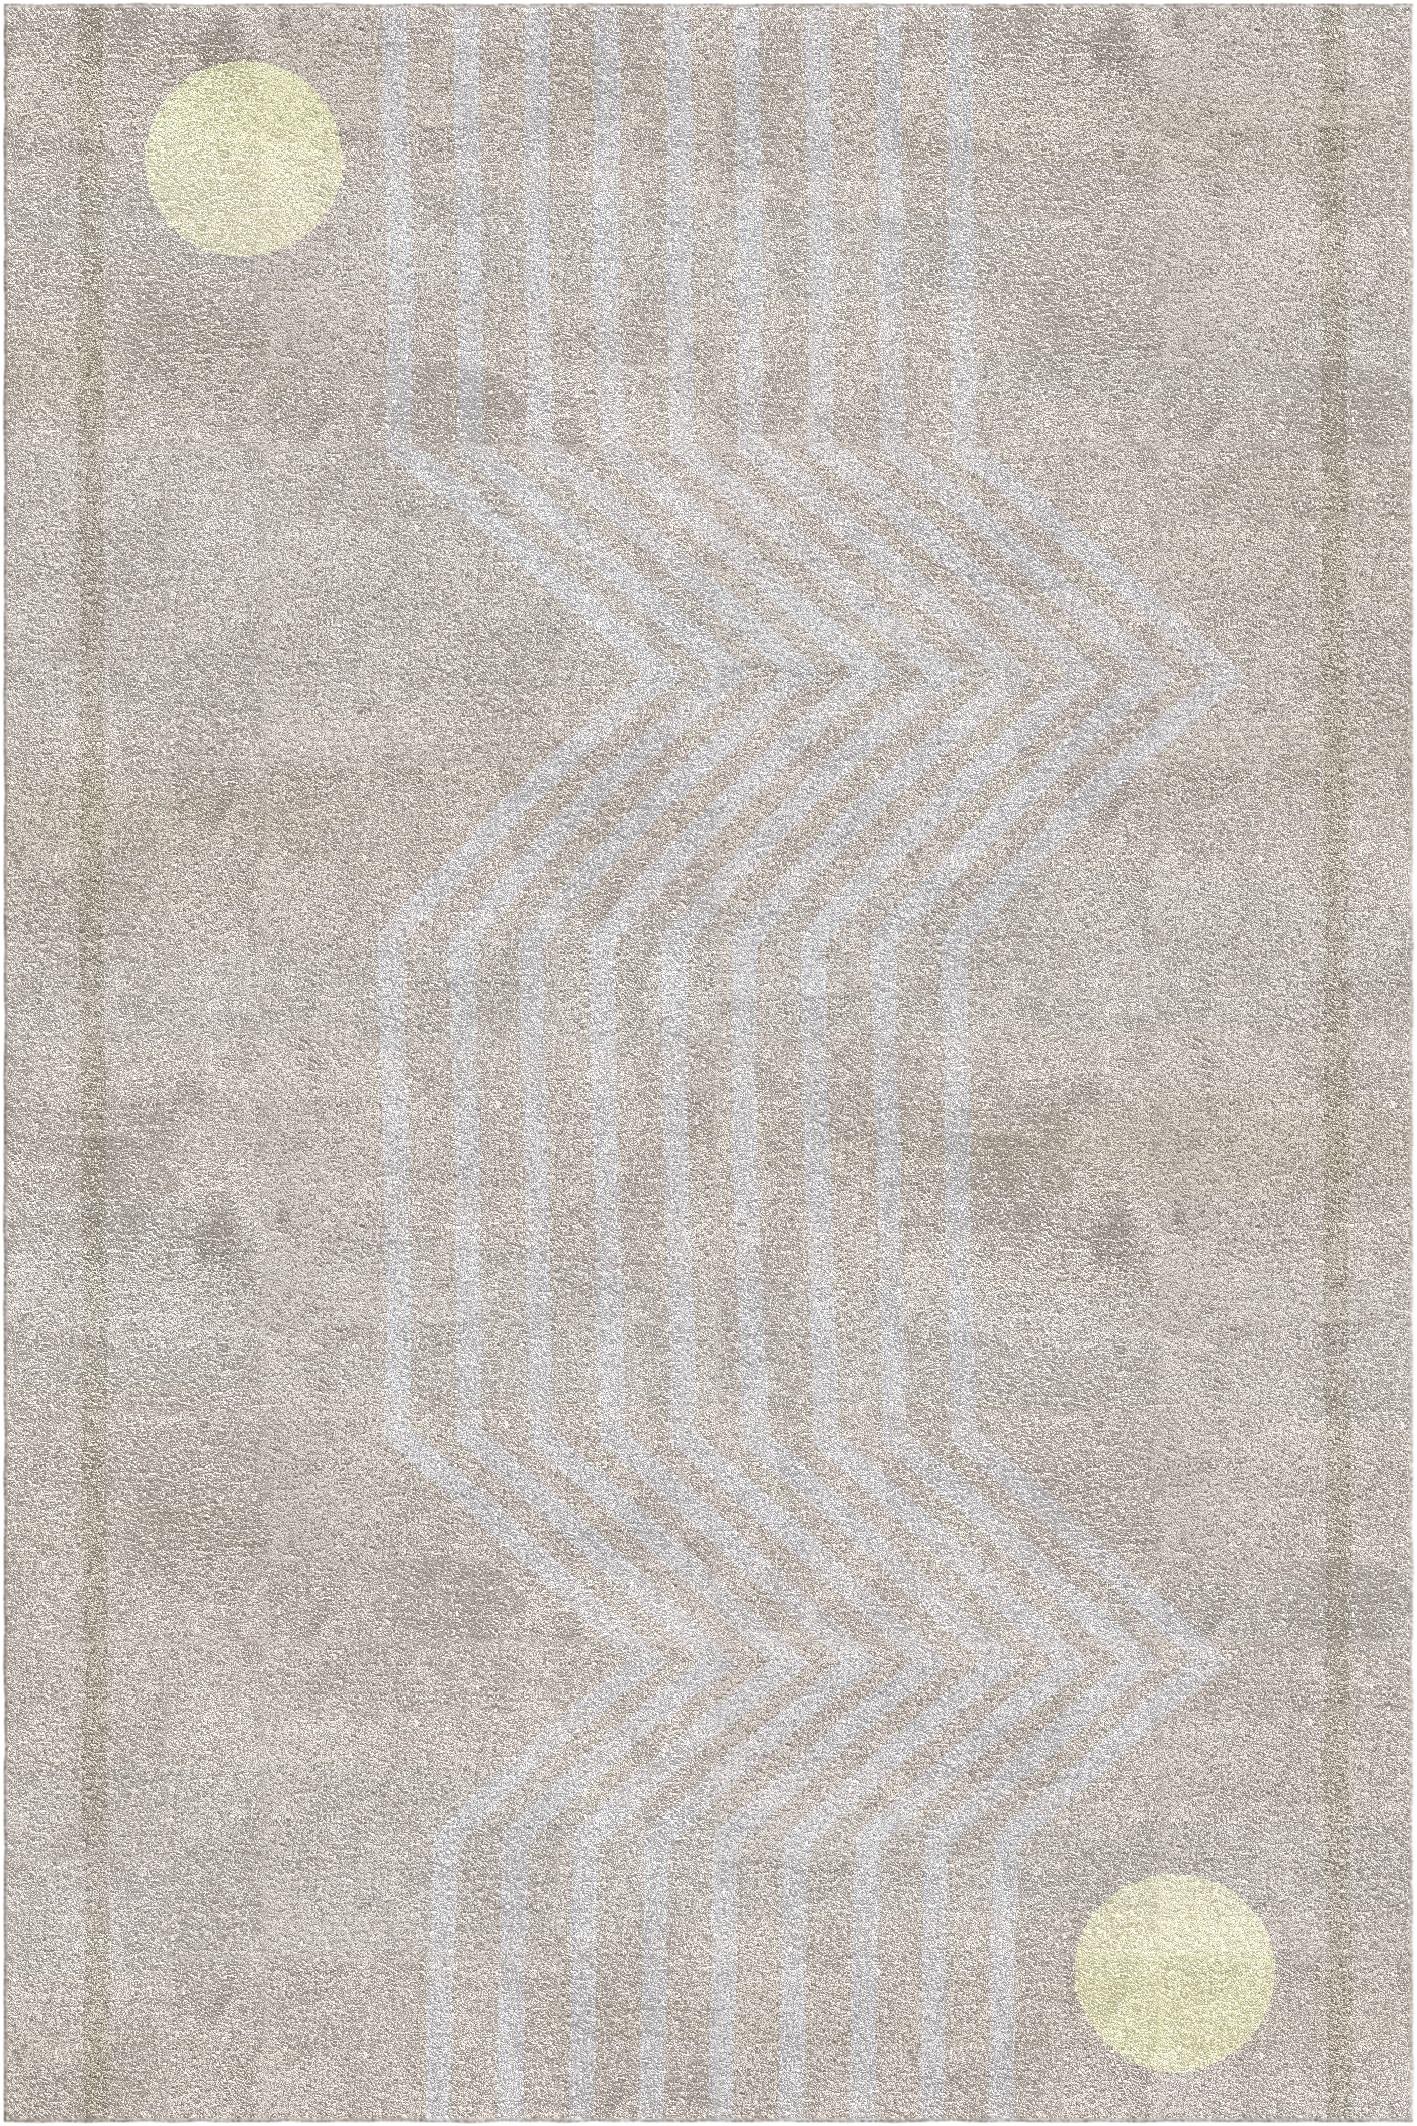 Hand-Crafted Futuro Rug I by Vanessa Ordoñez For Sale